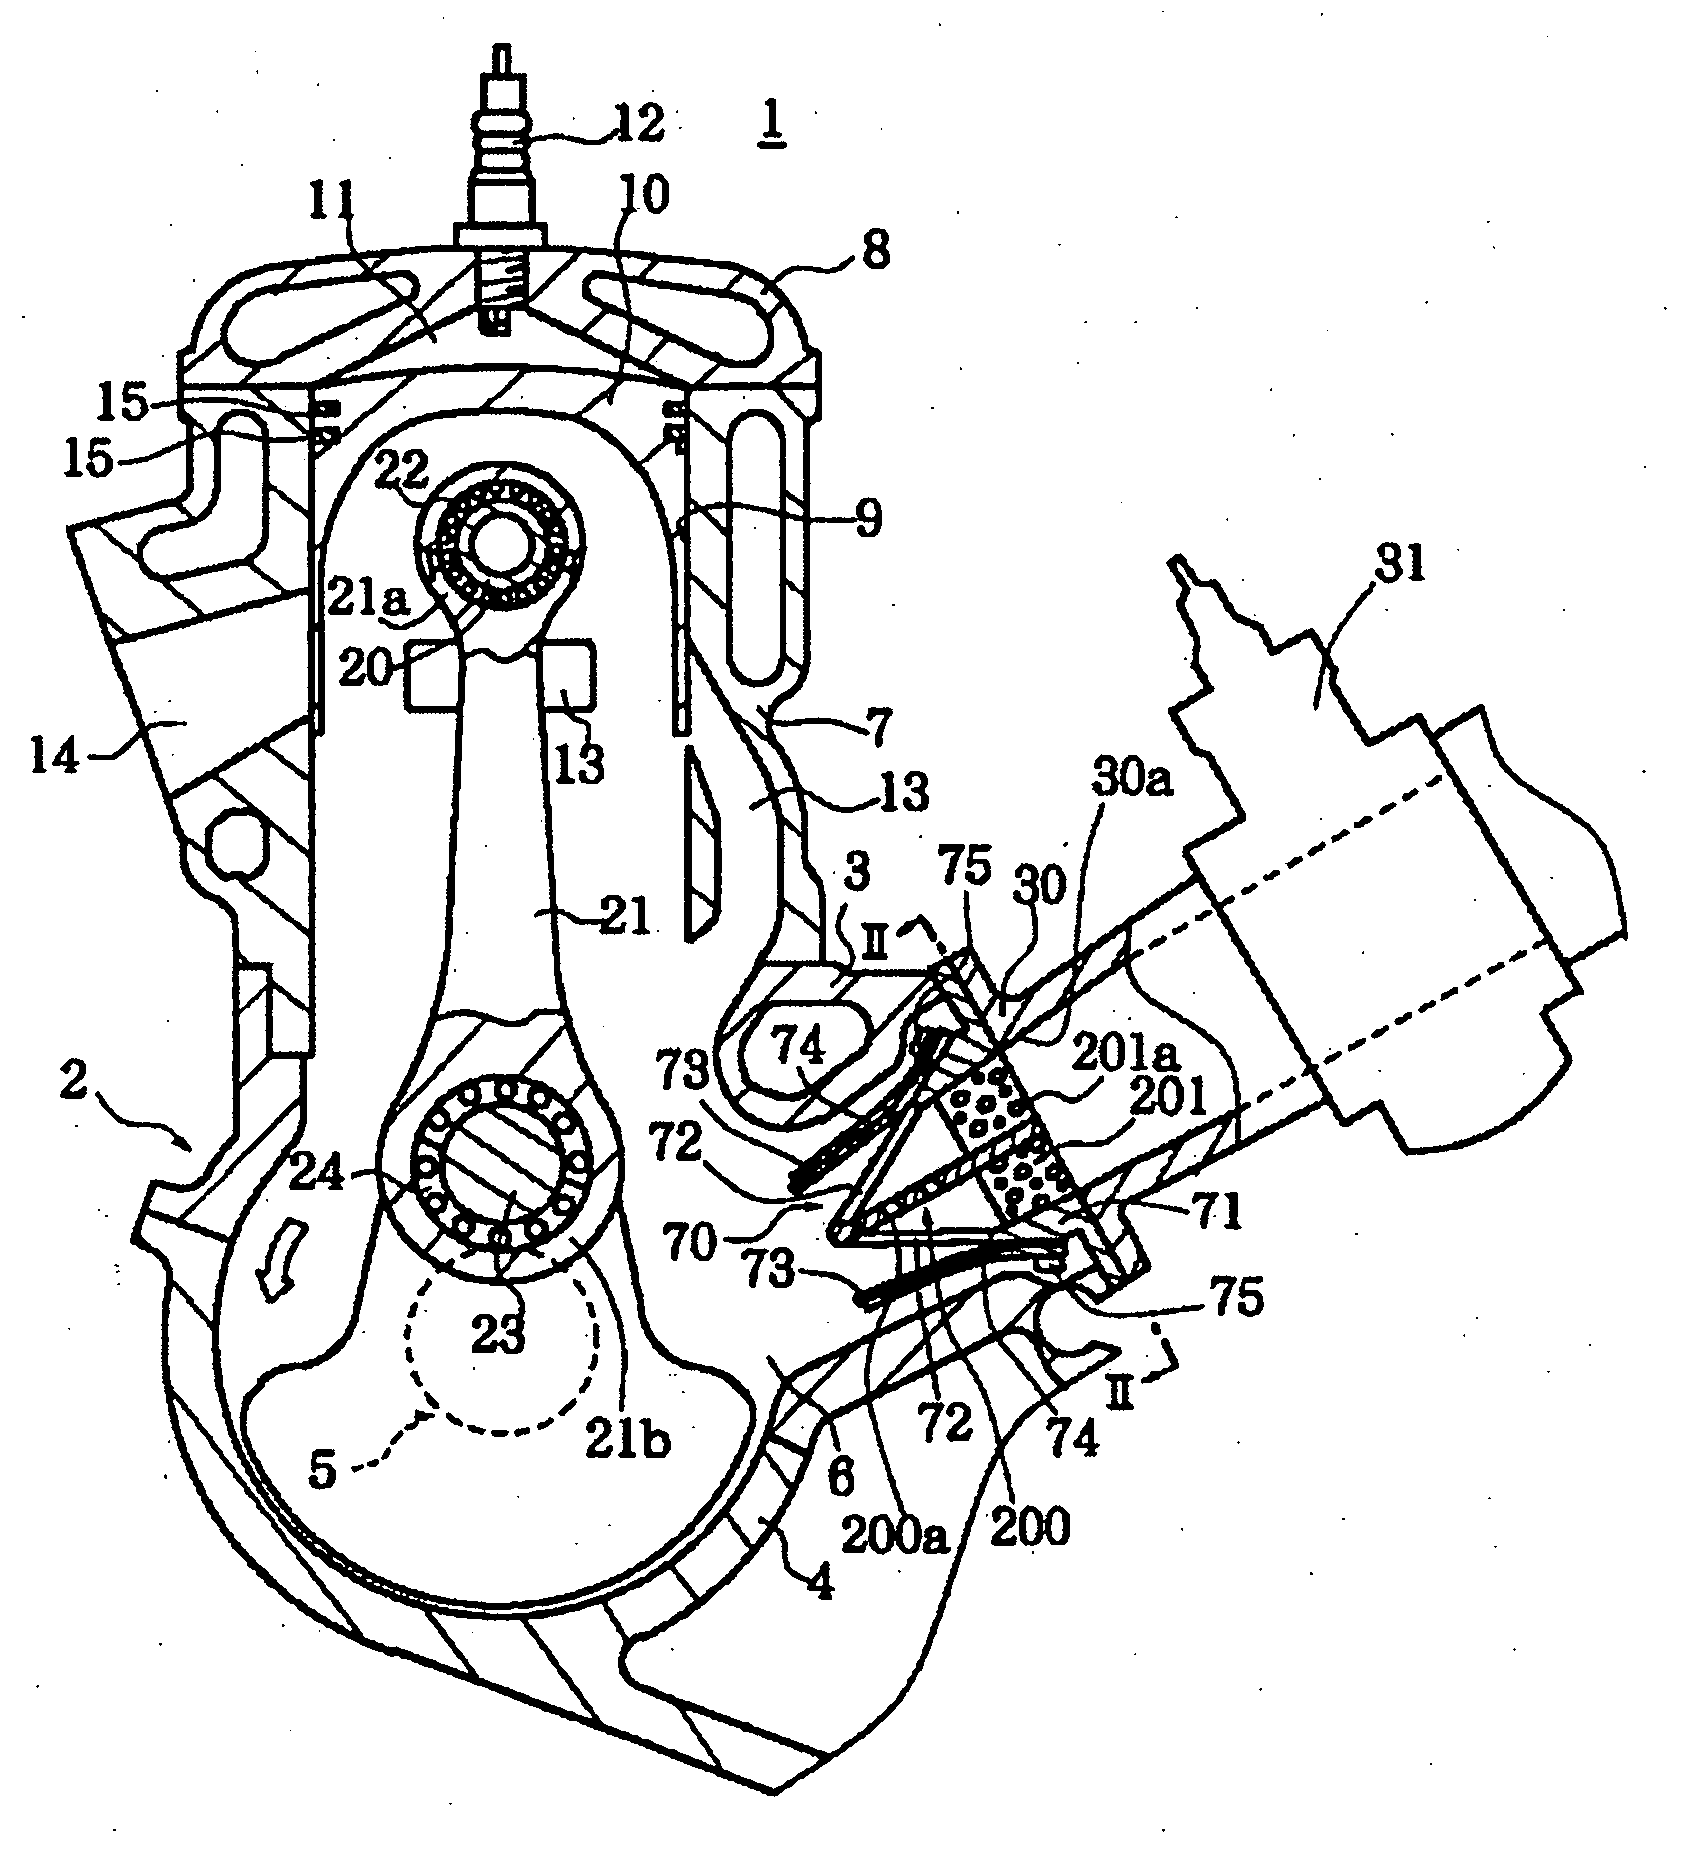 Intake device for engine